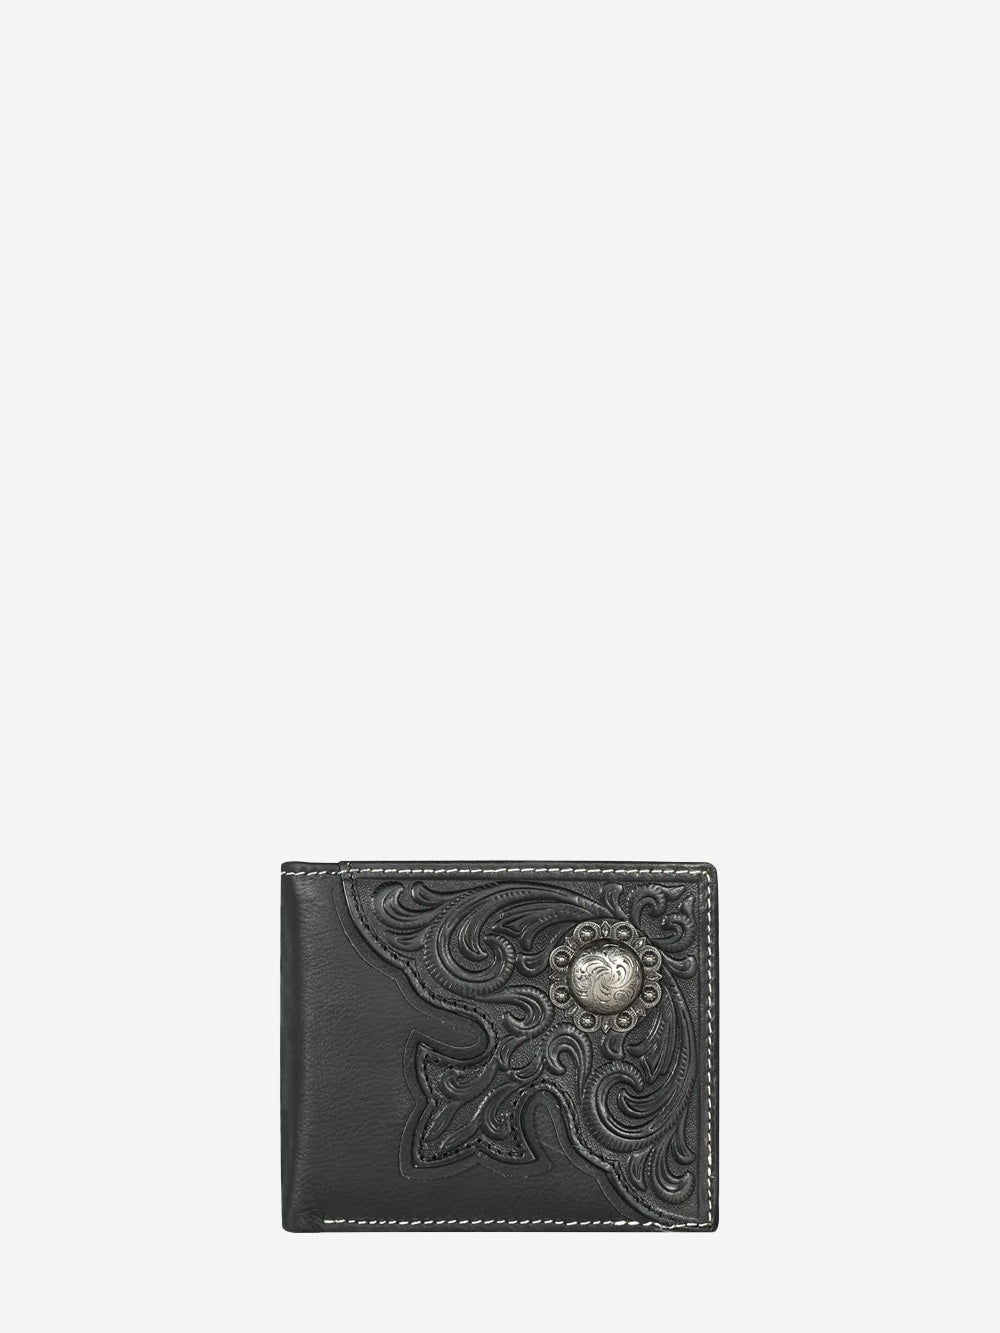 Montana West Genuine Leather Floral Tooled Men's Wallet - Montana West World